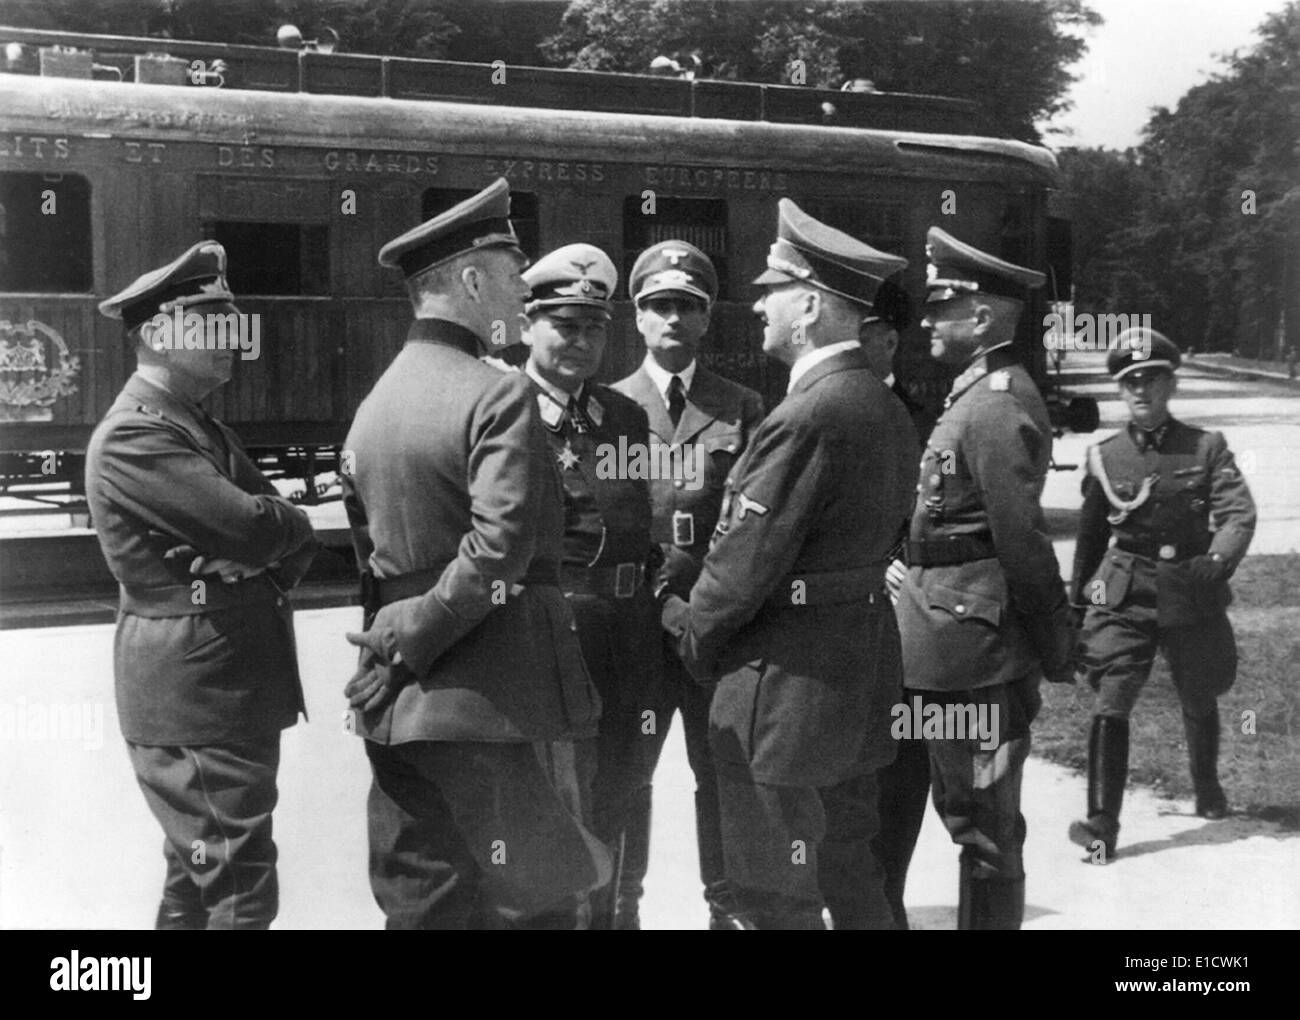 Adolf Hitler in Compiegne, France. He speaks with German generals in front of same train carriage in which the 1918 World War 1 Stock Photo